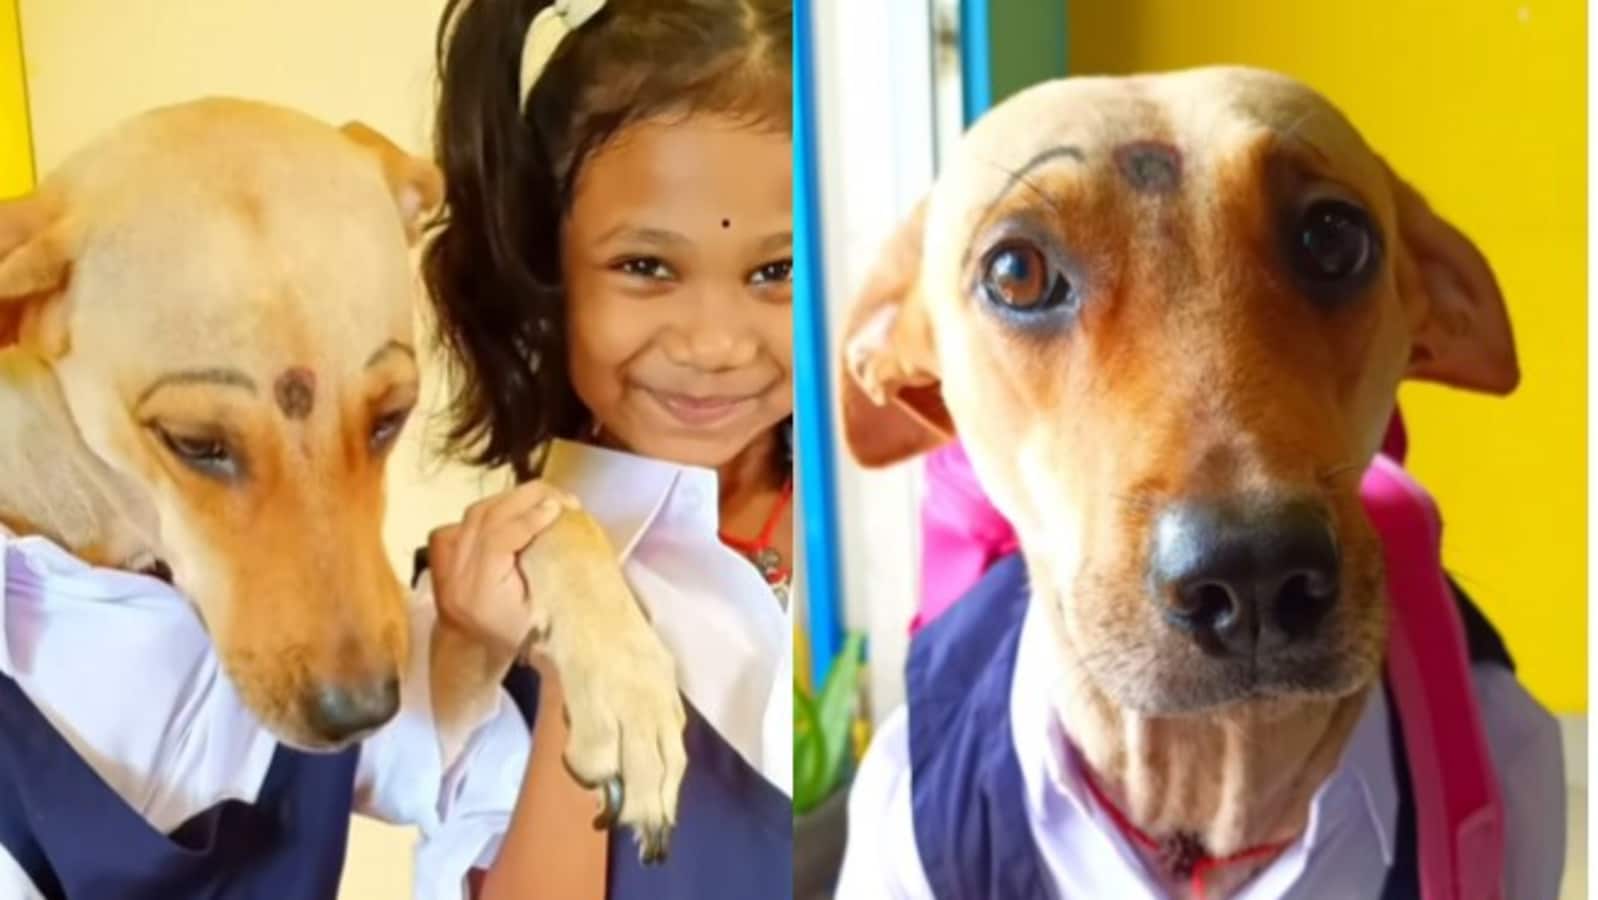 Adorable dog twins with little girl in a pinafore, video will make you say aww. Watch